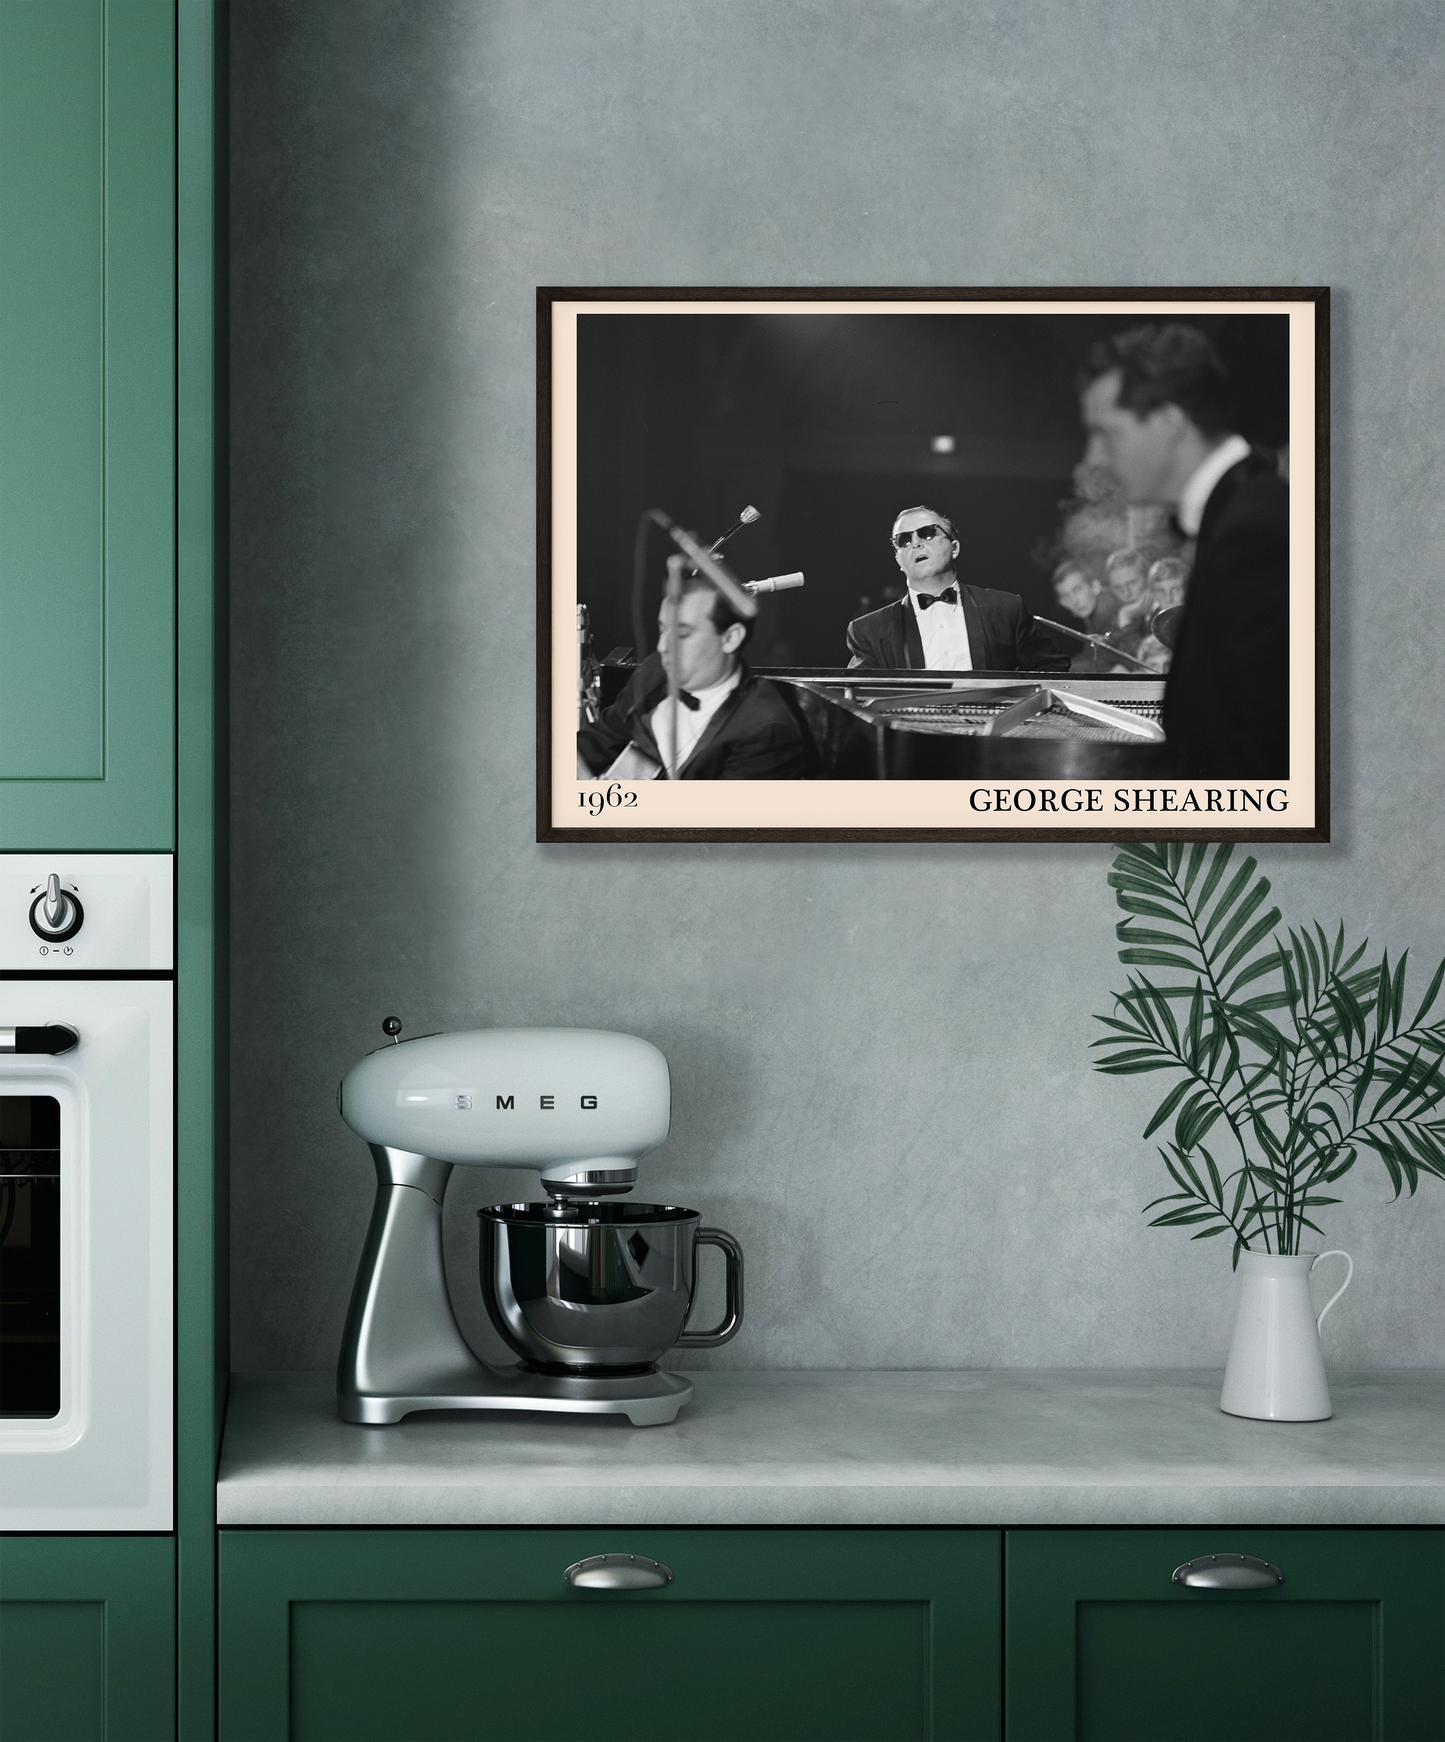 1962 picture of George Shearing playing piano. Picture crafted into a cool black framed music print, with an off-white border. Poster is hanging on a grey kitchen wall.